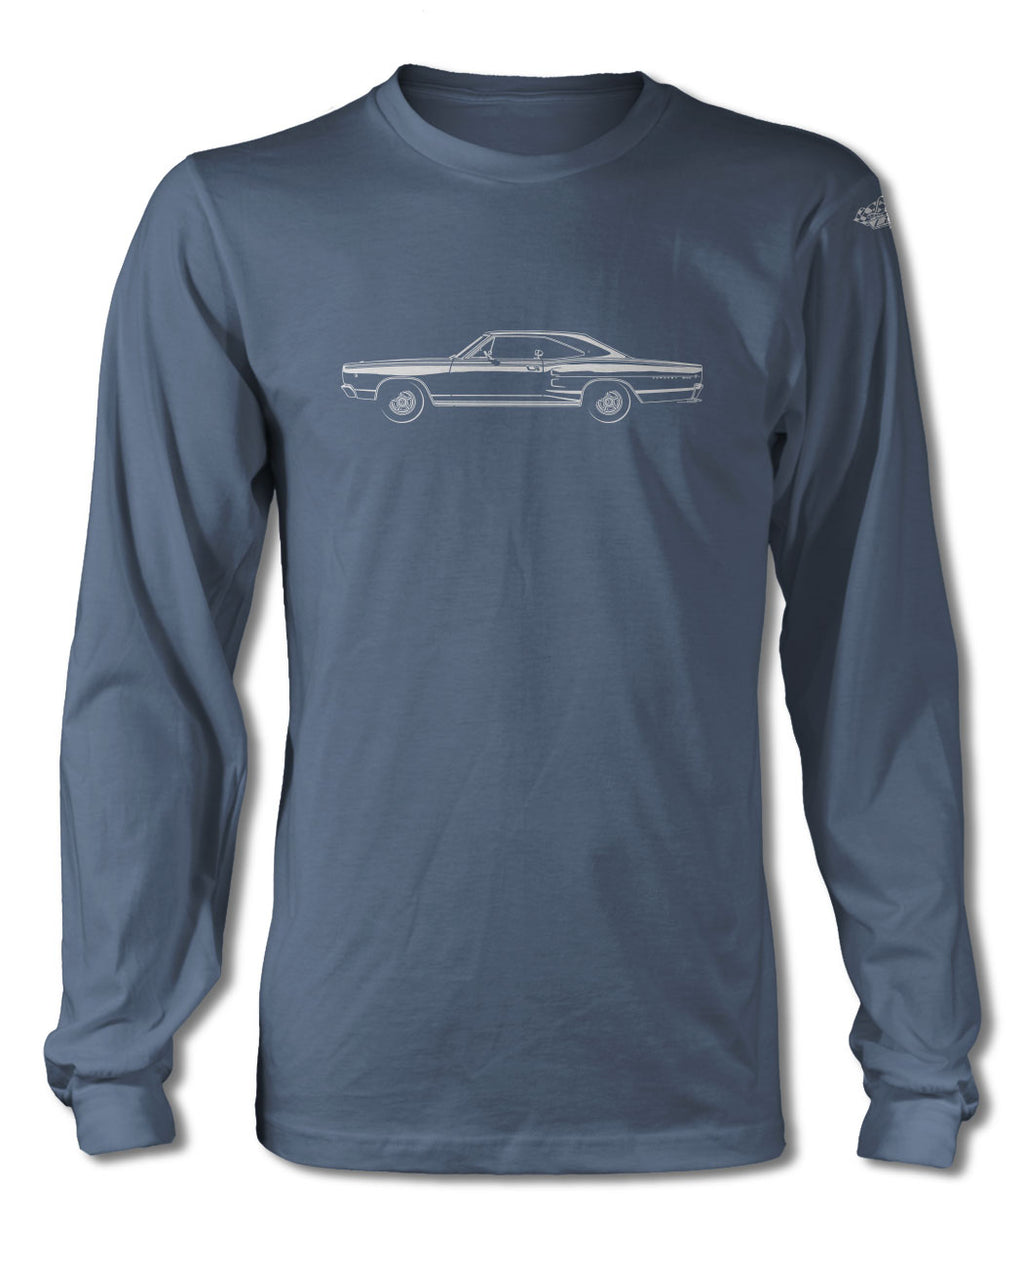 1968 Dodge Coronet 500 Coupe T-Shirt - Long Sleeves - Side View